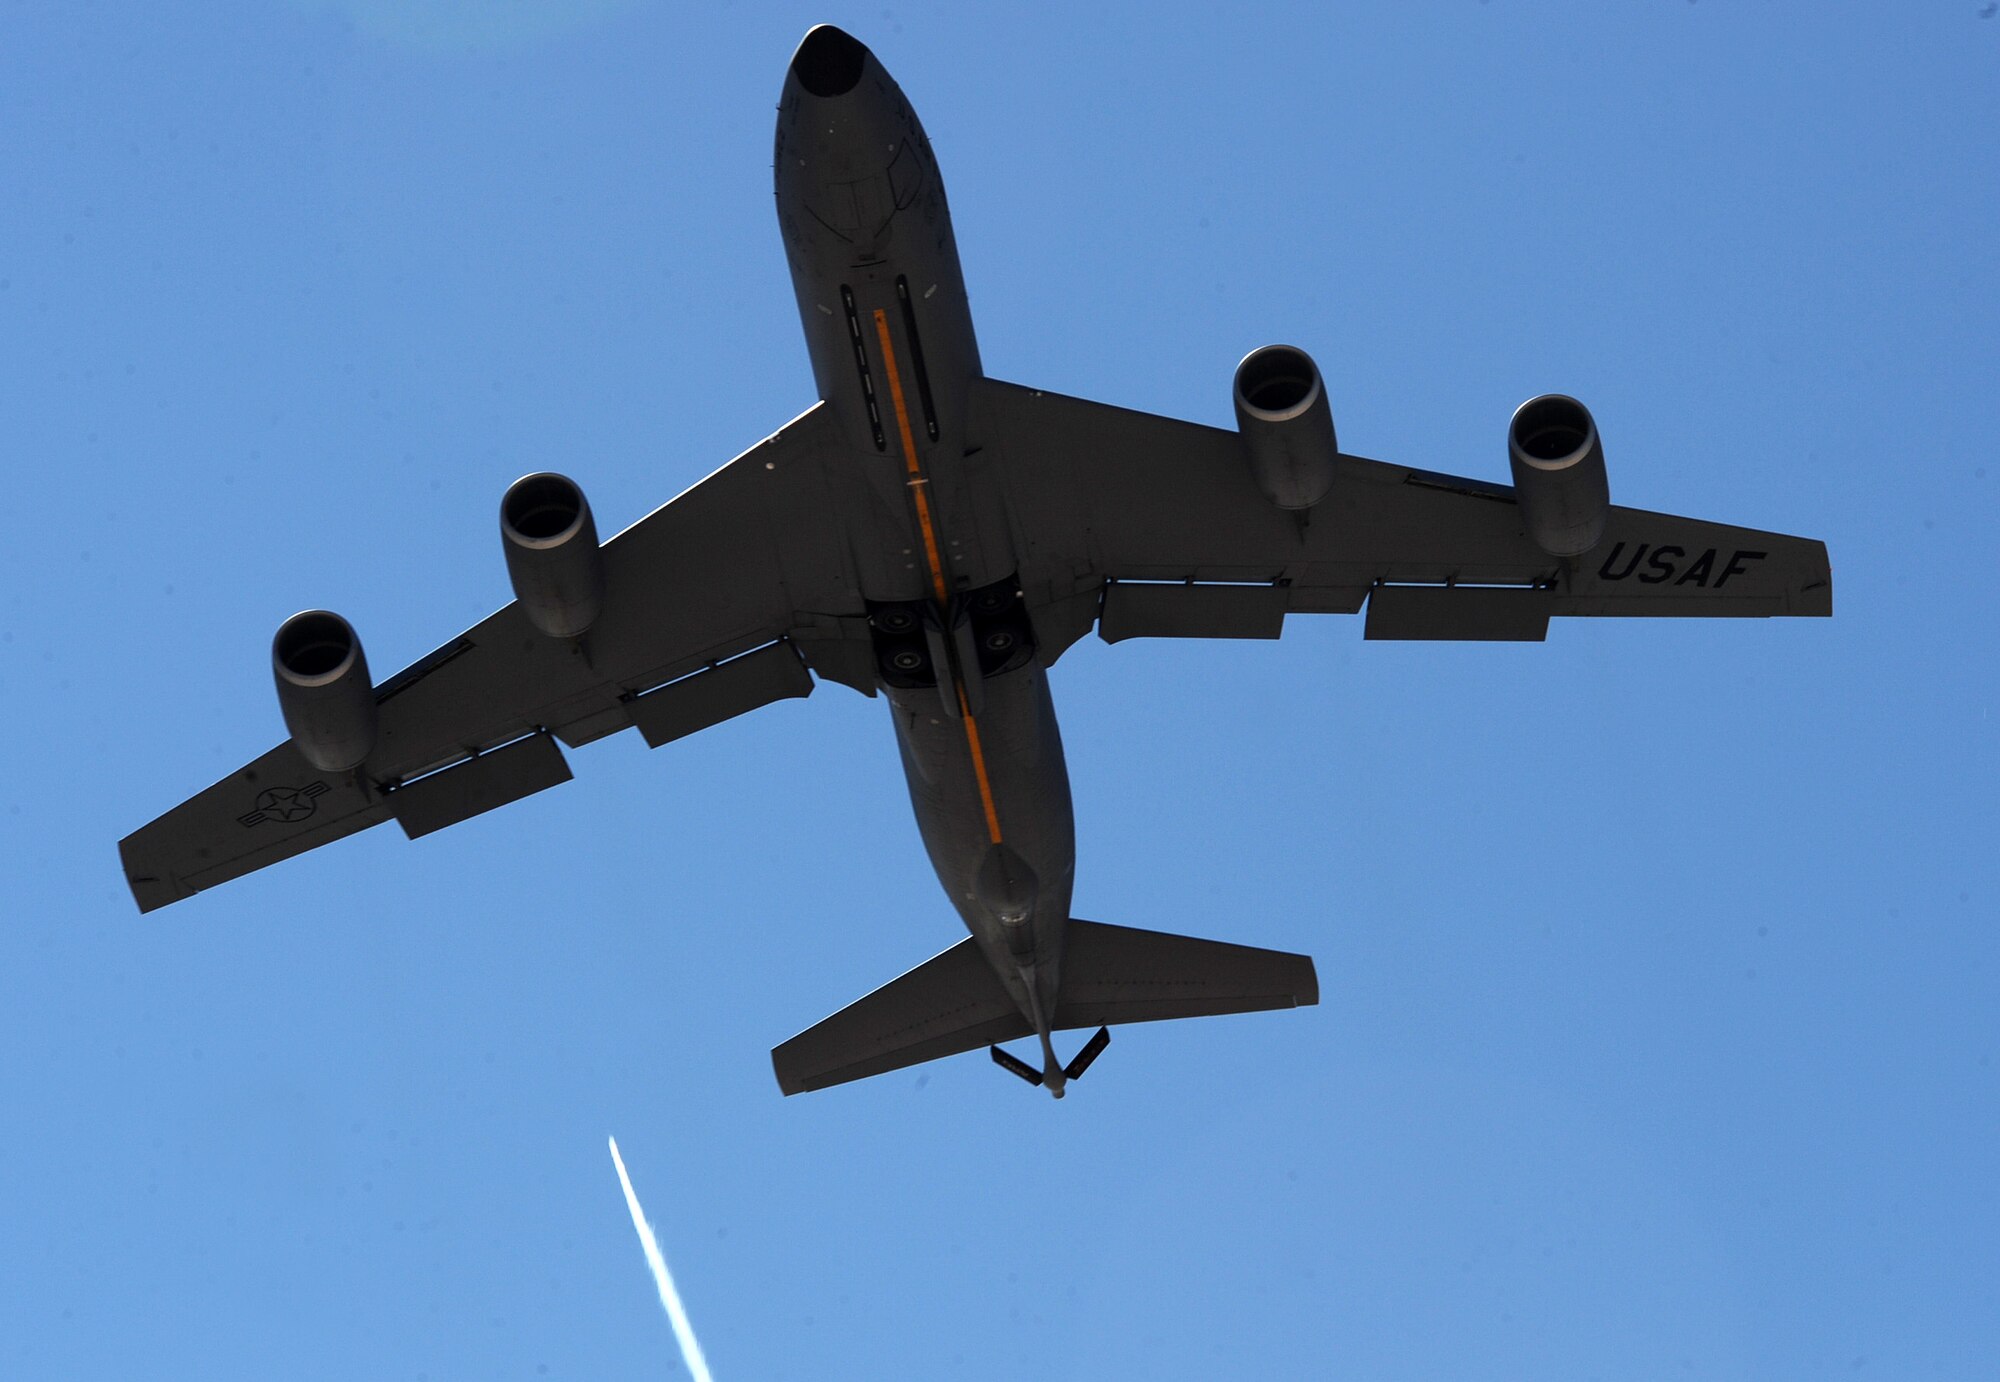 A KC-135 Stratotanker flies overhead during the start of Red Flag 16-2, at Nellis Air Force Base, Nev. The purpose of Red Flag is to provide advance, realistic and relevant training in a contested, degraded and operationally limited environment and tankers like the KC-135 help sustain the coalition forces in the air to complete the mission. (U.S. Air Force photo/Senior Airman David Bernal Del Agua)